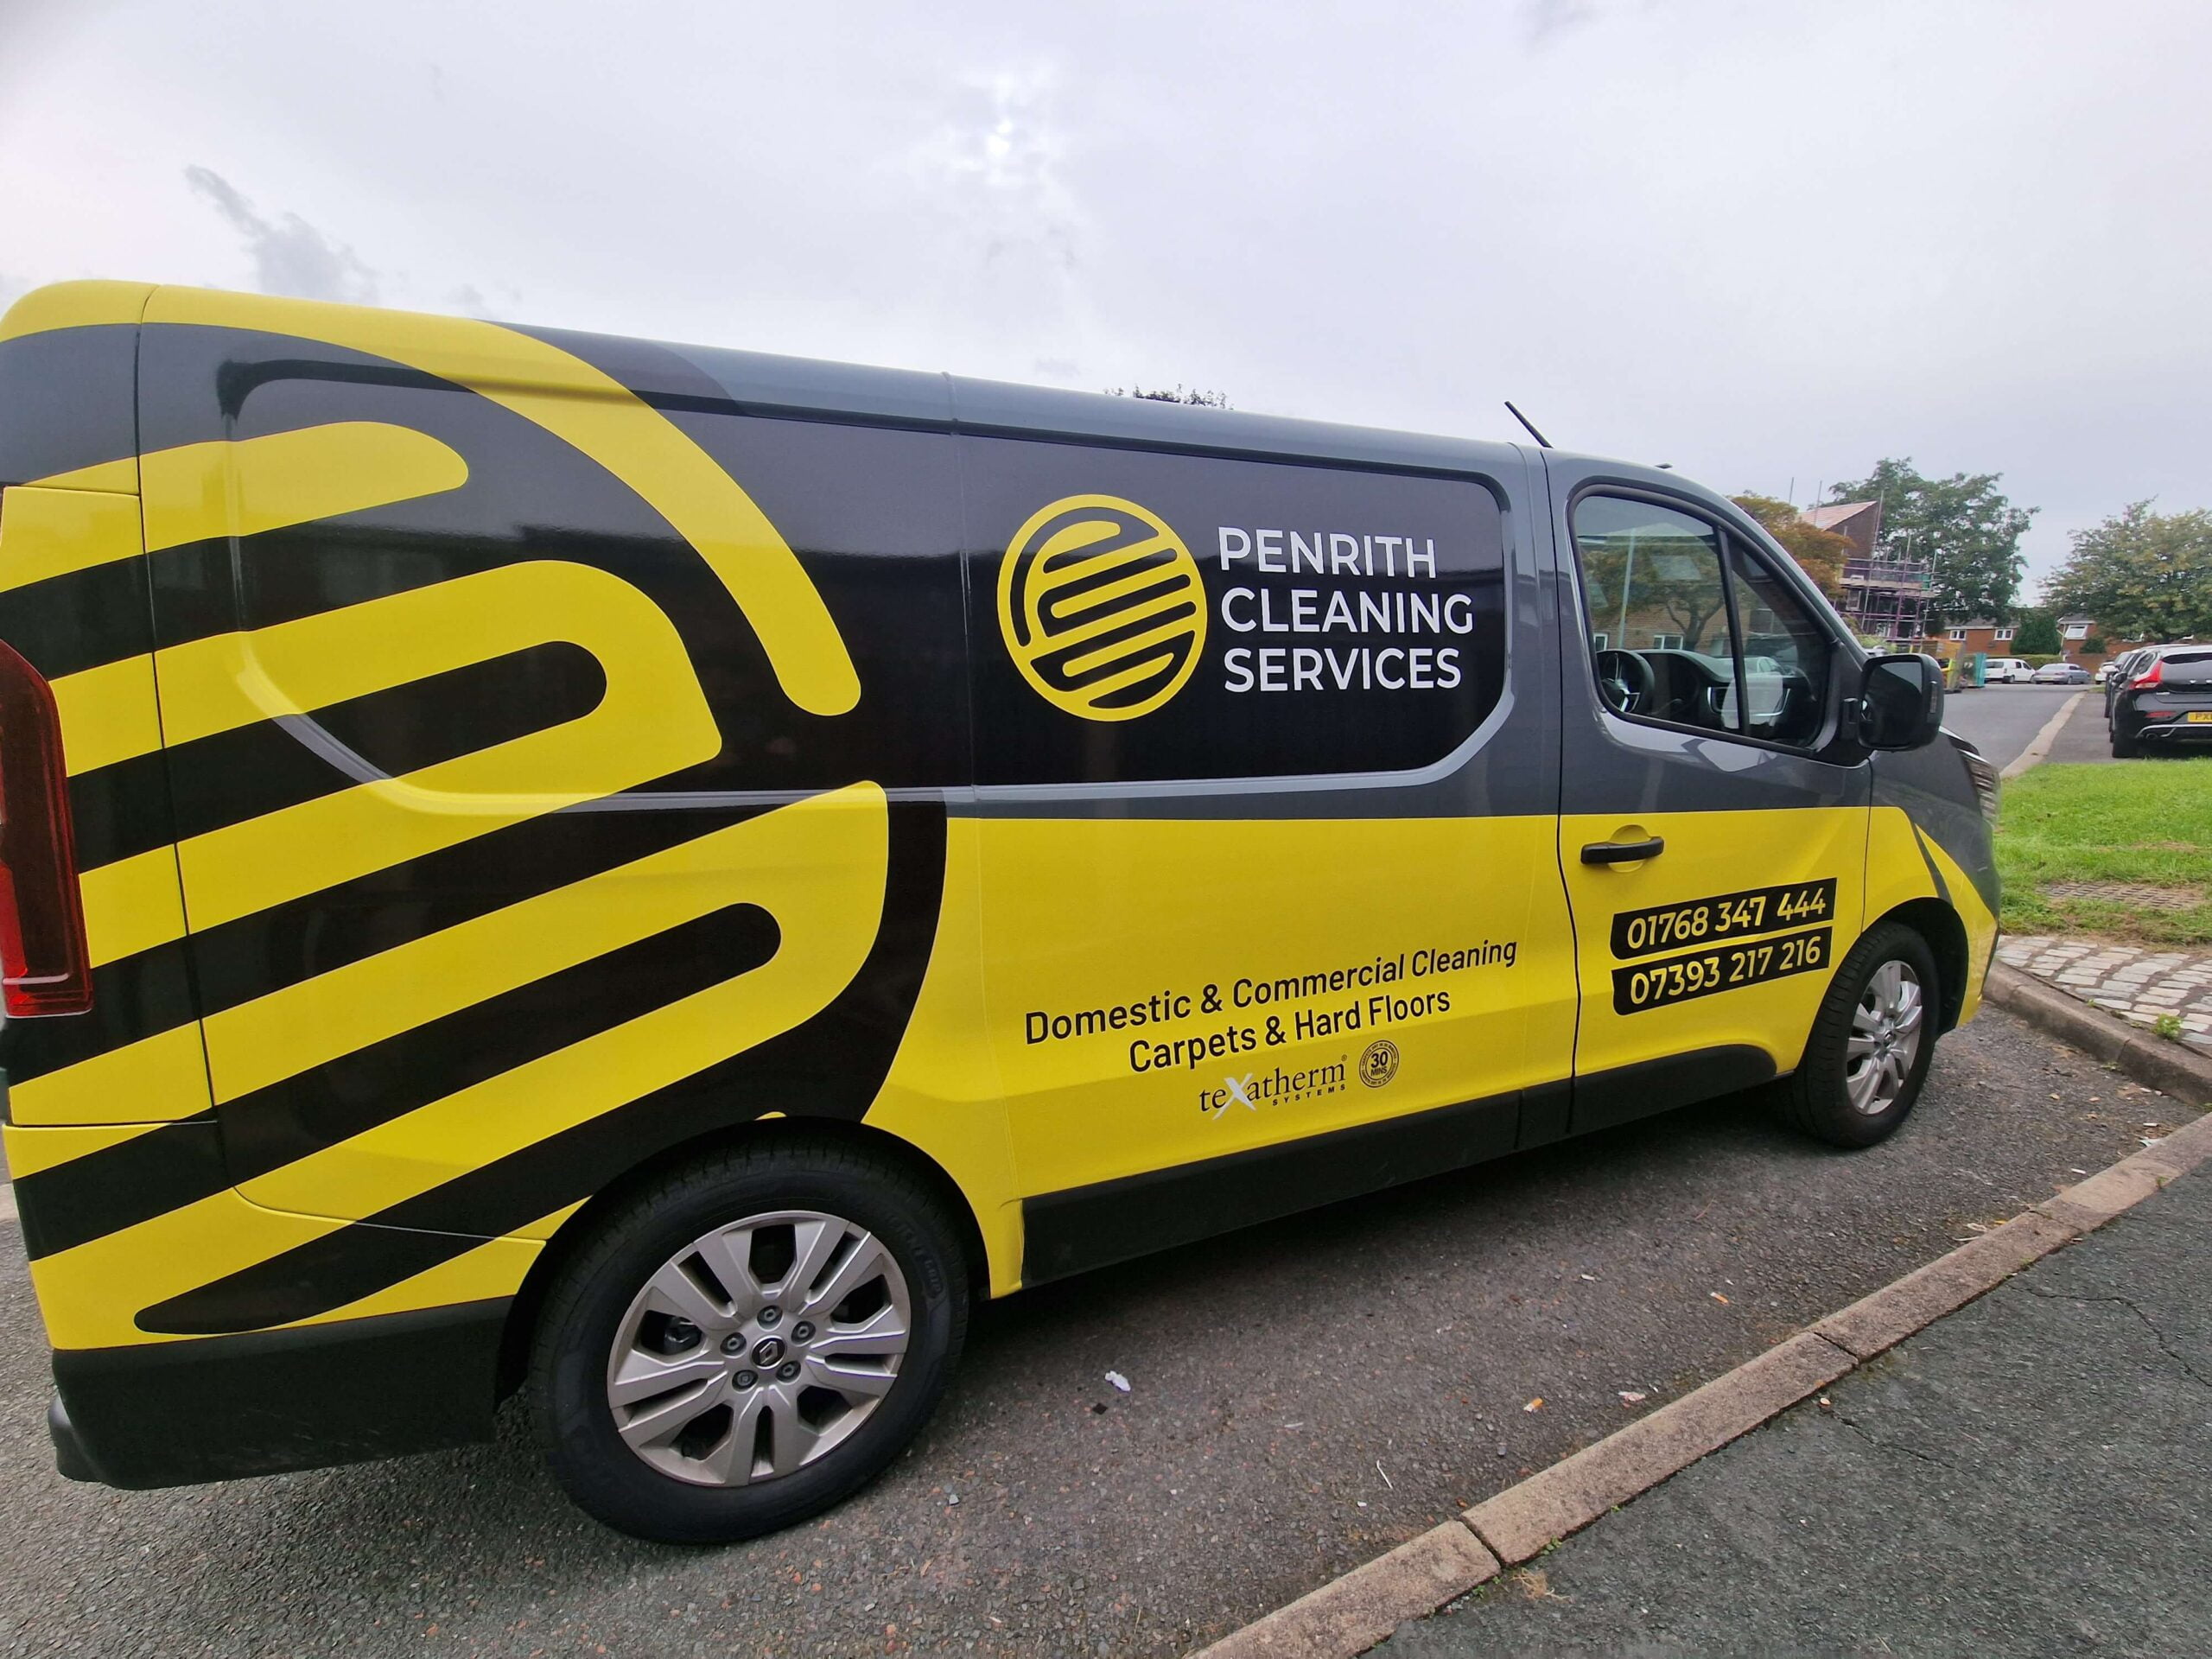 Van with Penrith Cleaning Services design